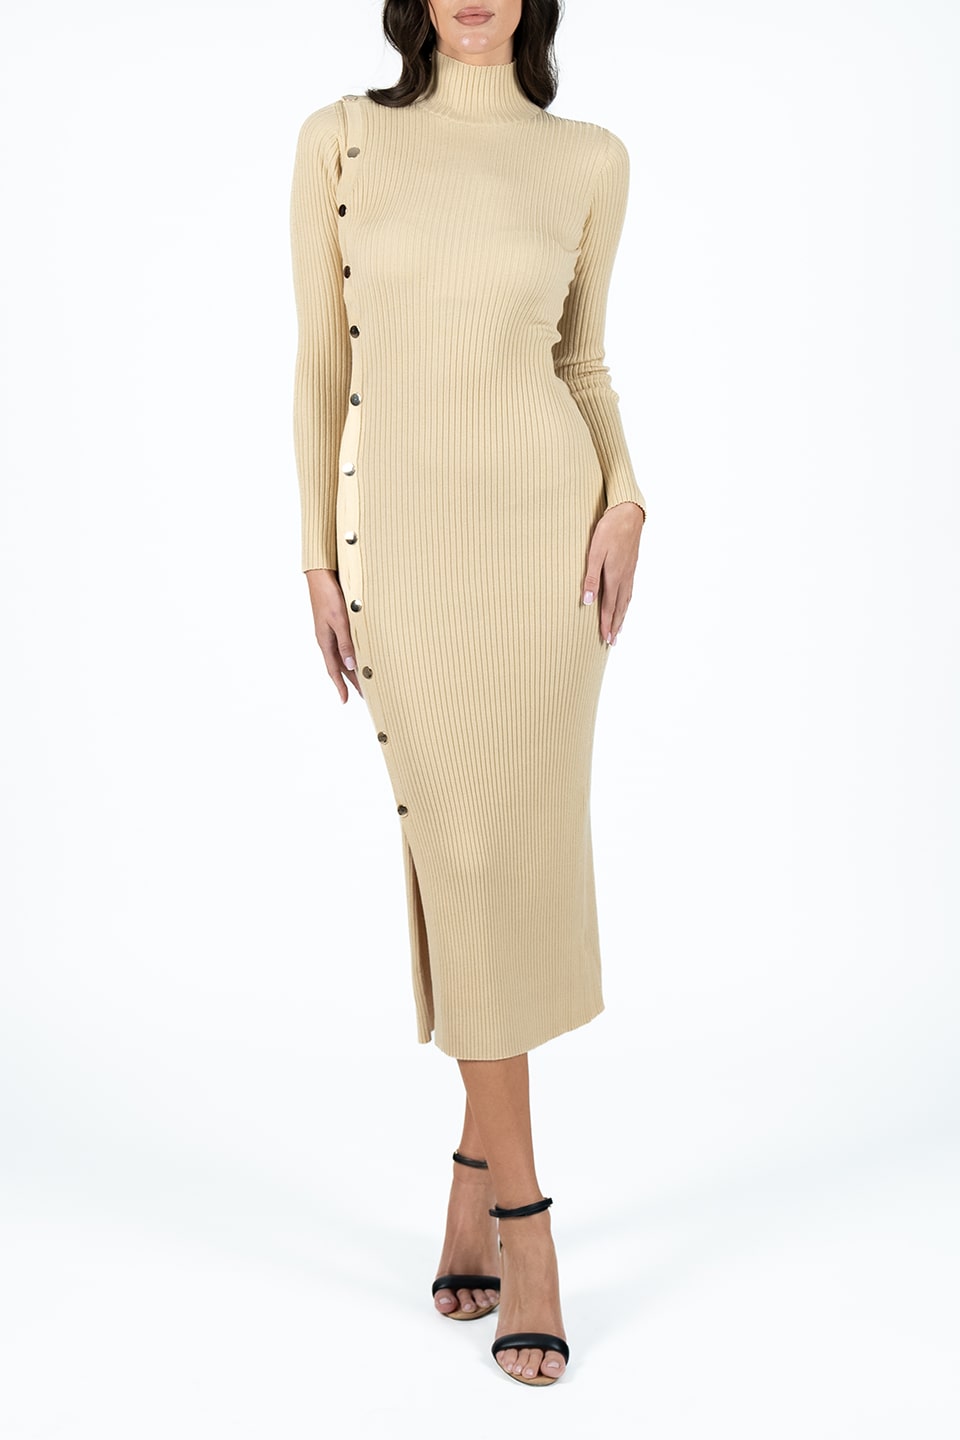 Shop online trendy Beige Midi dresses from Dodo Bar Or Fashion designer. Product gallery 1